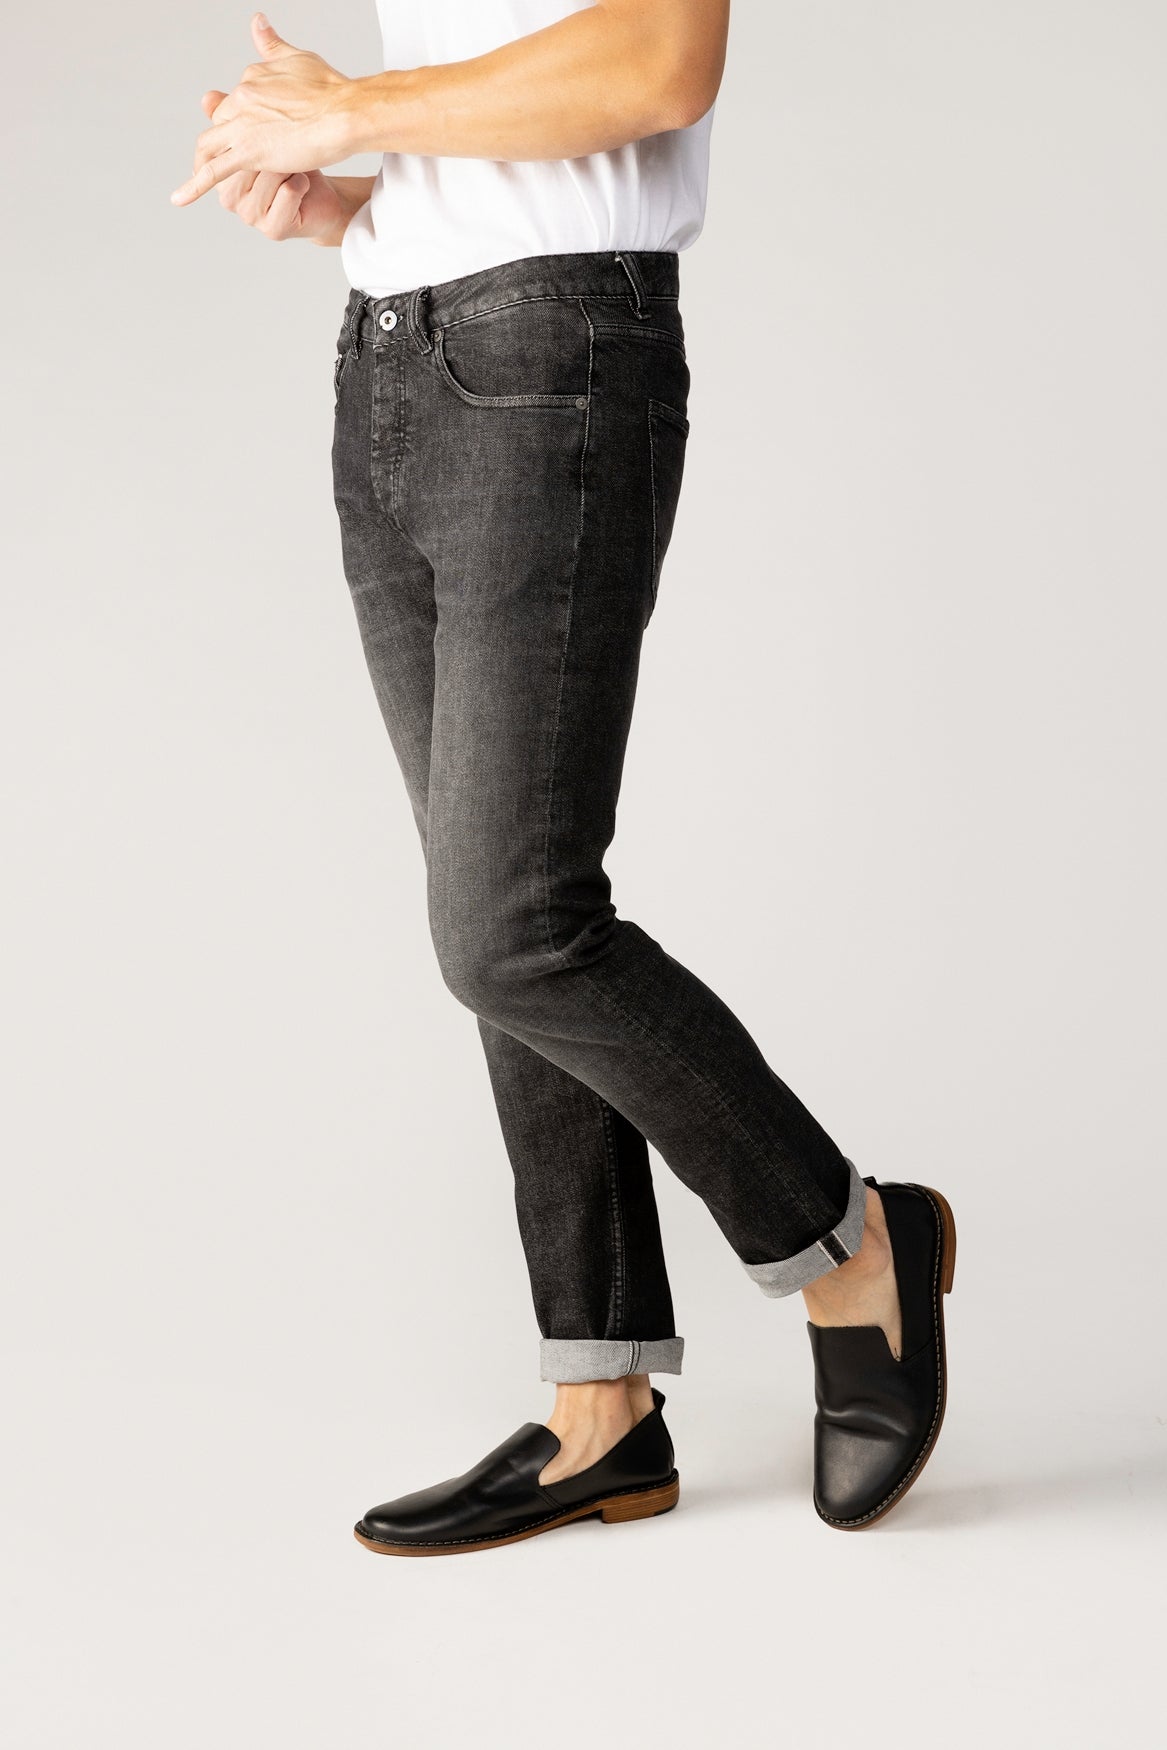 For the biggest selection of selvedge denim brands buy @Union Clothing |  Union Clothing